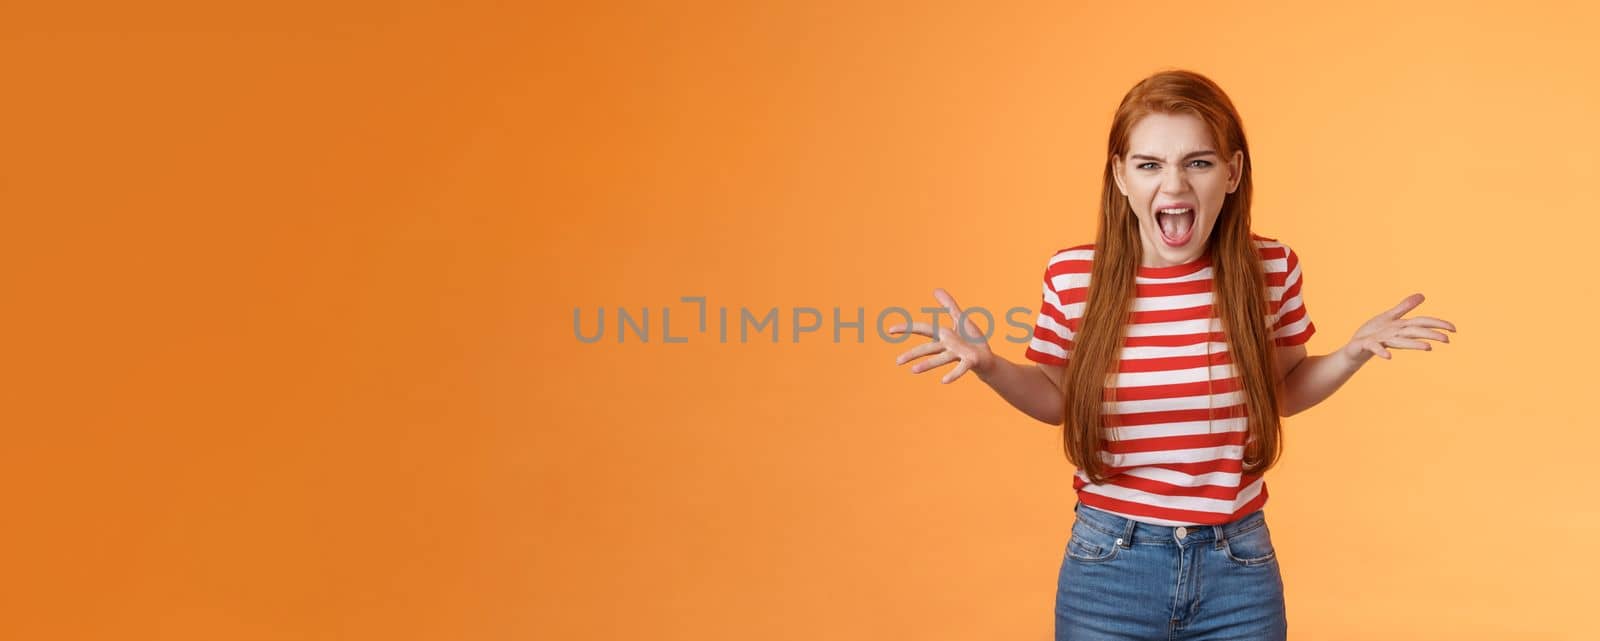 Pissed angry and annoyed redhead female arguing yelling with hatred and anger, spread hands sideways dismay, complain look disappointed upset and hateful, stand orange background. Copy space